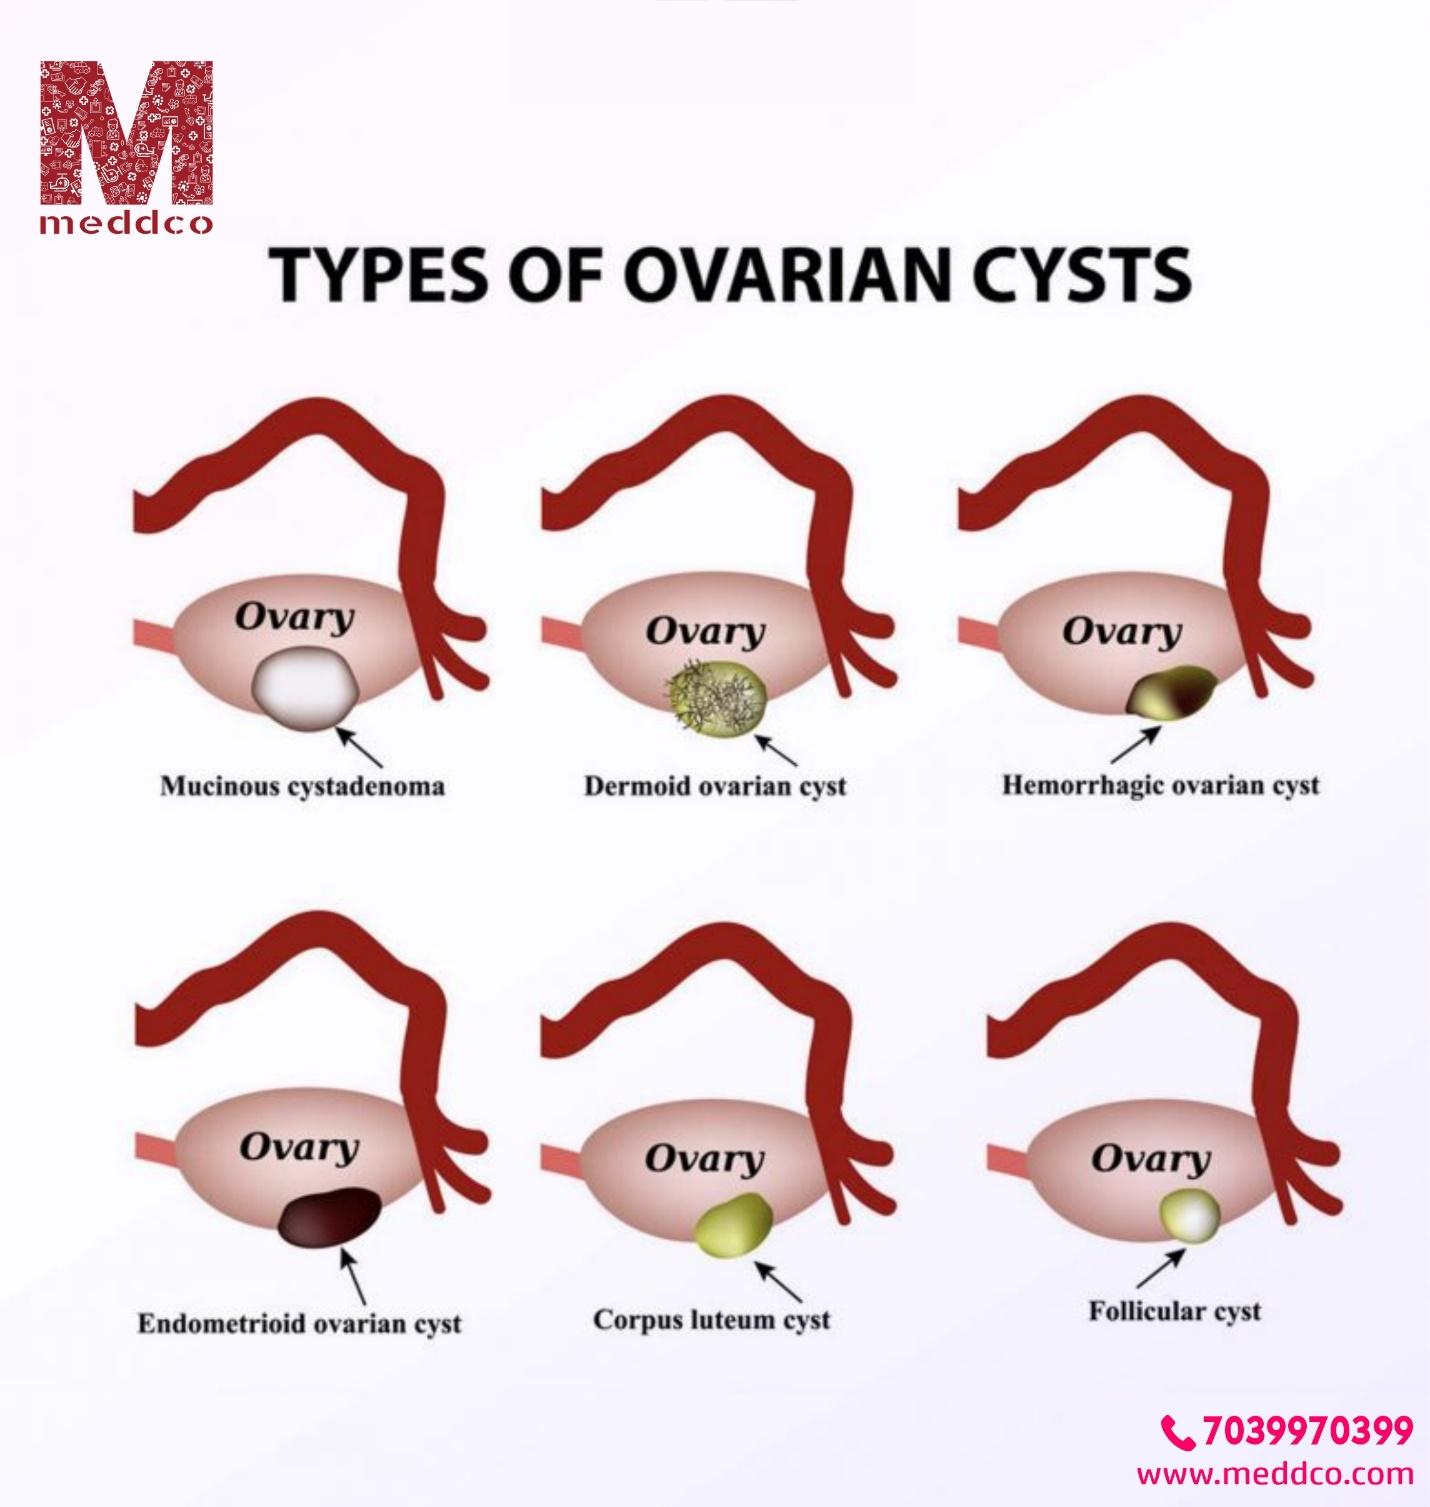 C:\Users\anmol\Downloads\types of ovarian cysts.jpg